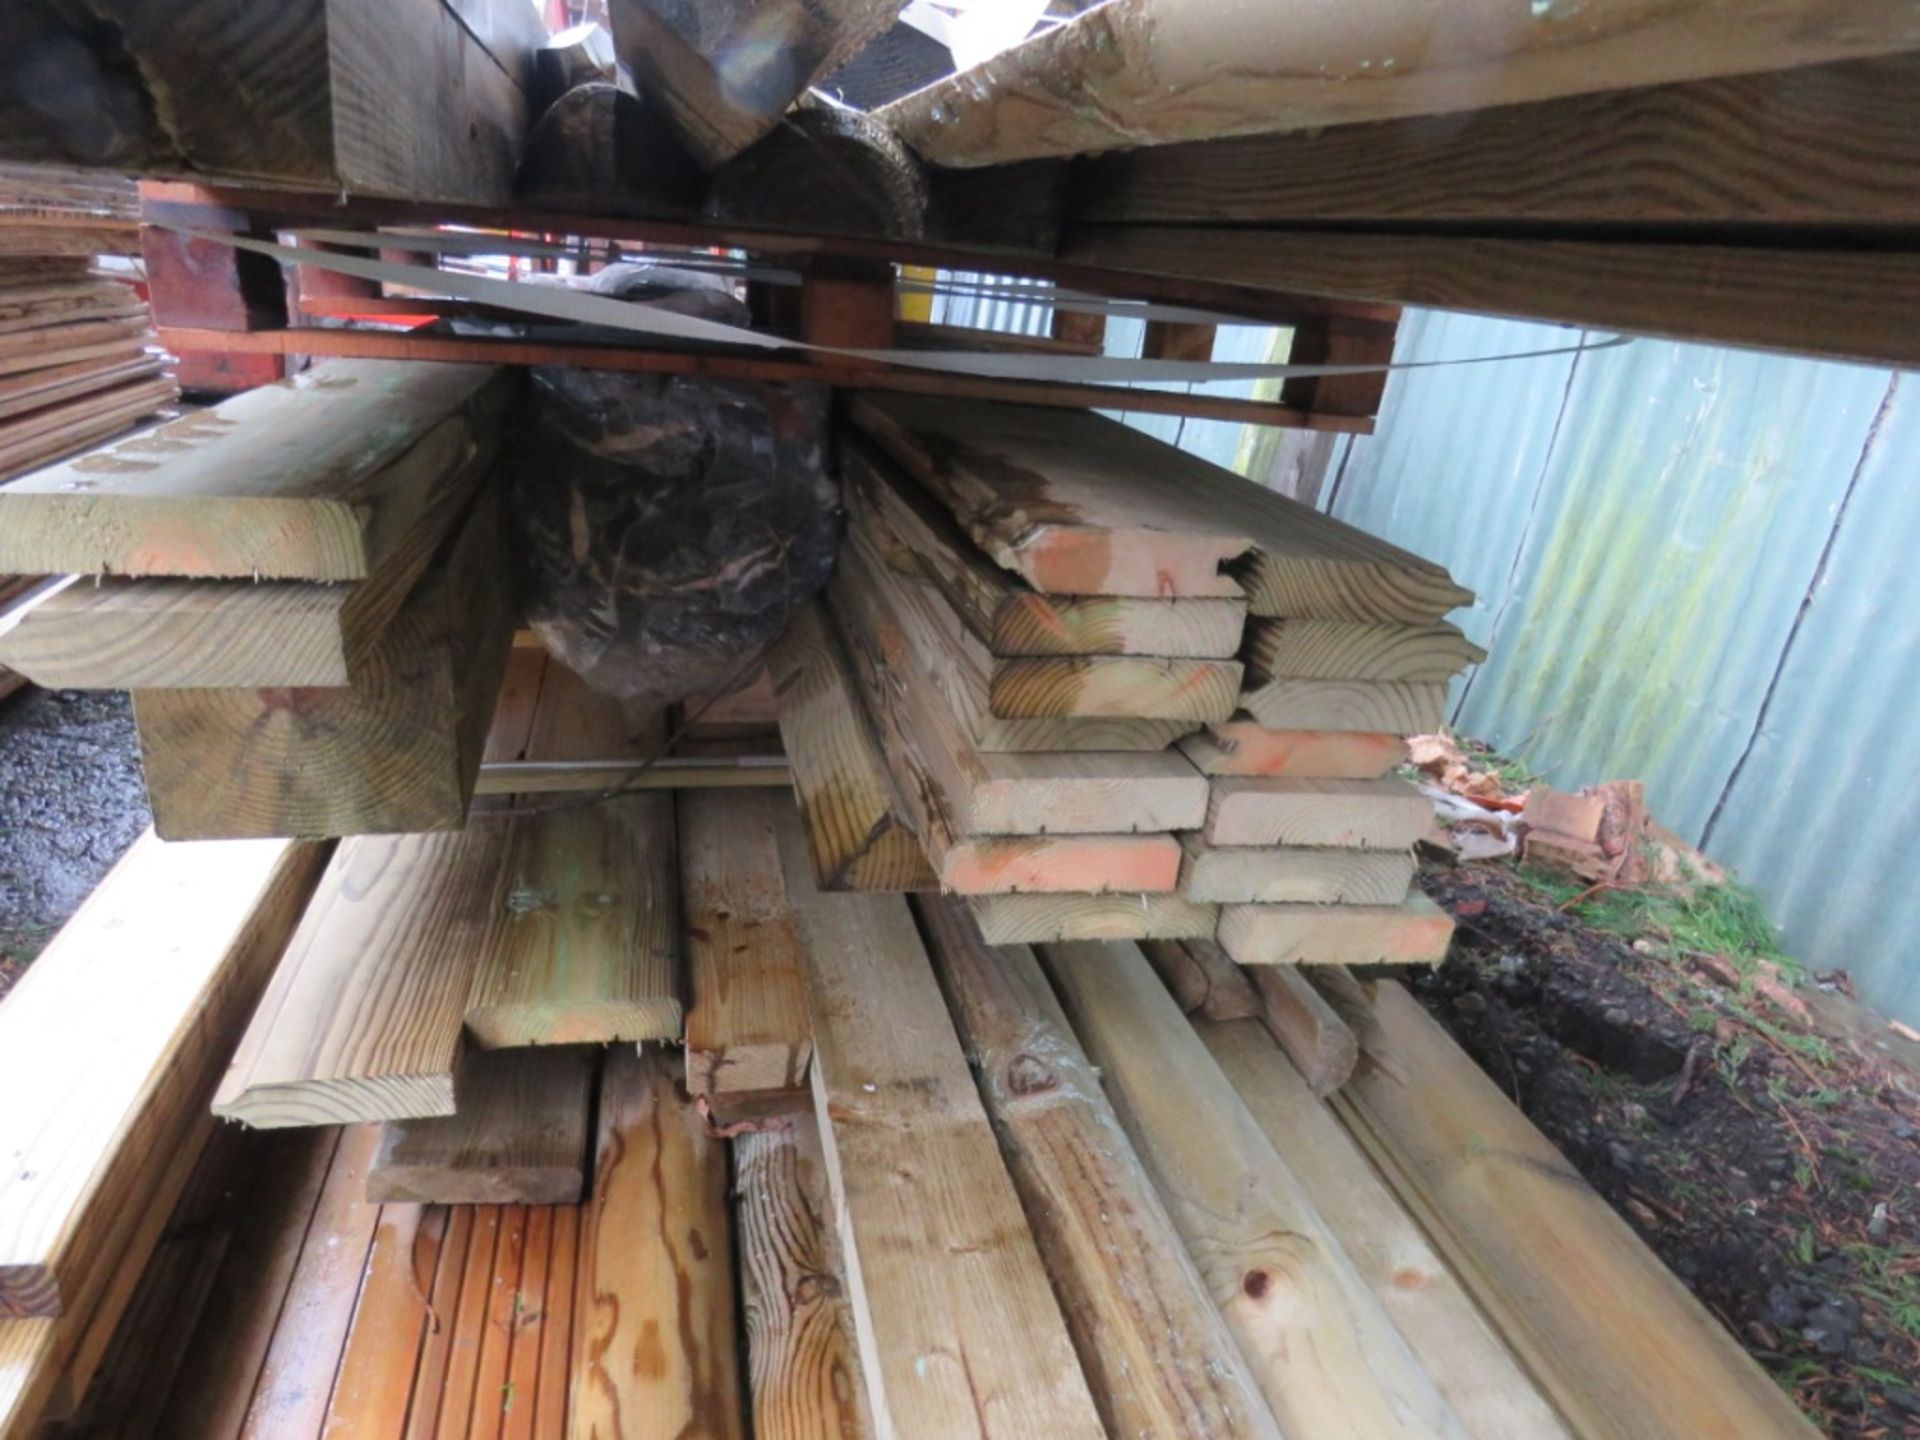 LARGE STACK OF ASSORTED TIMBER POSTS, ROLL OF WIRE, BOARDS ETC. 6FT -12FT APPROX. - Image 8 of 9